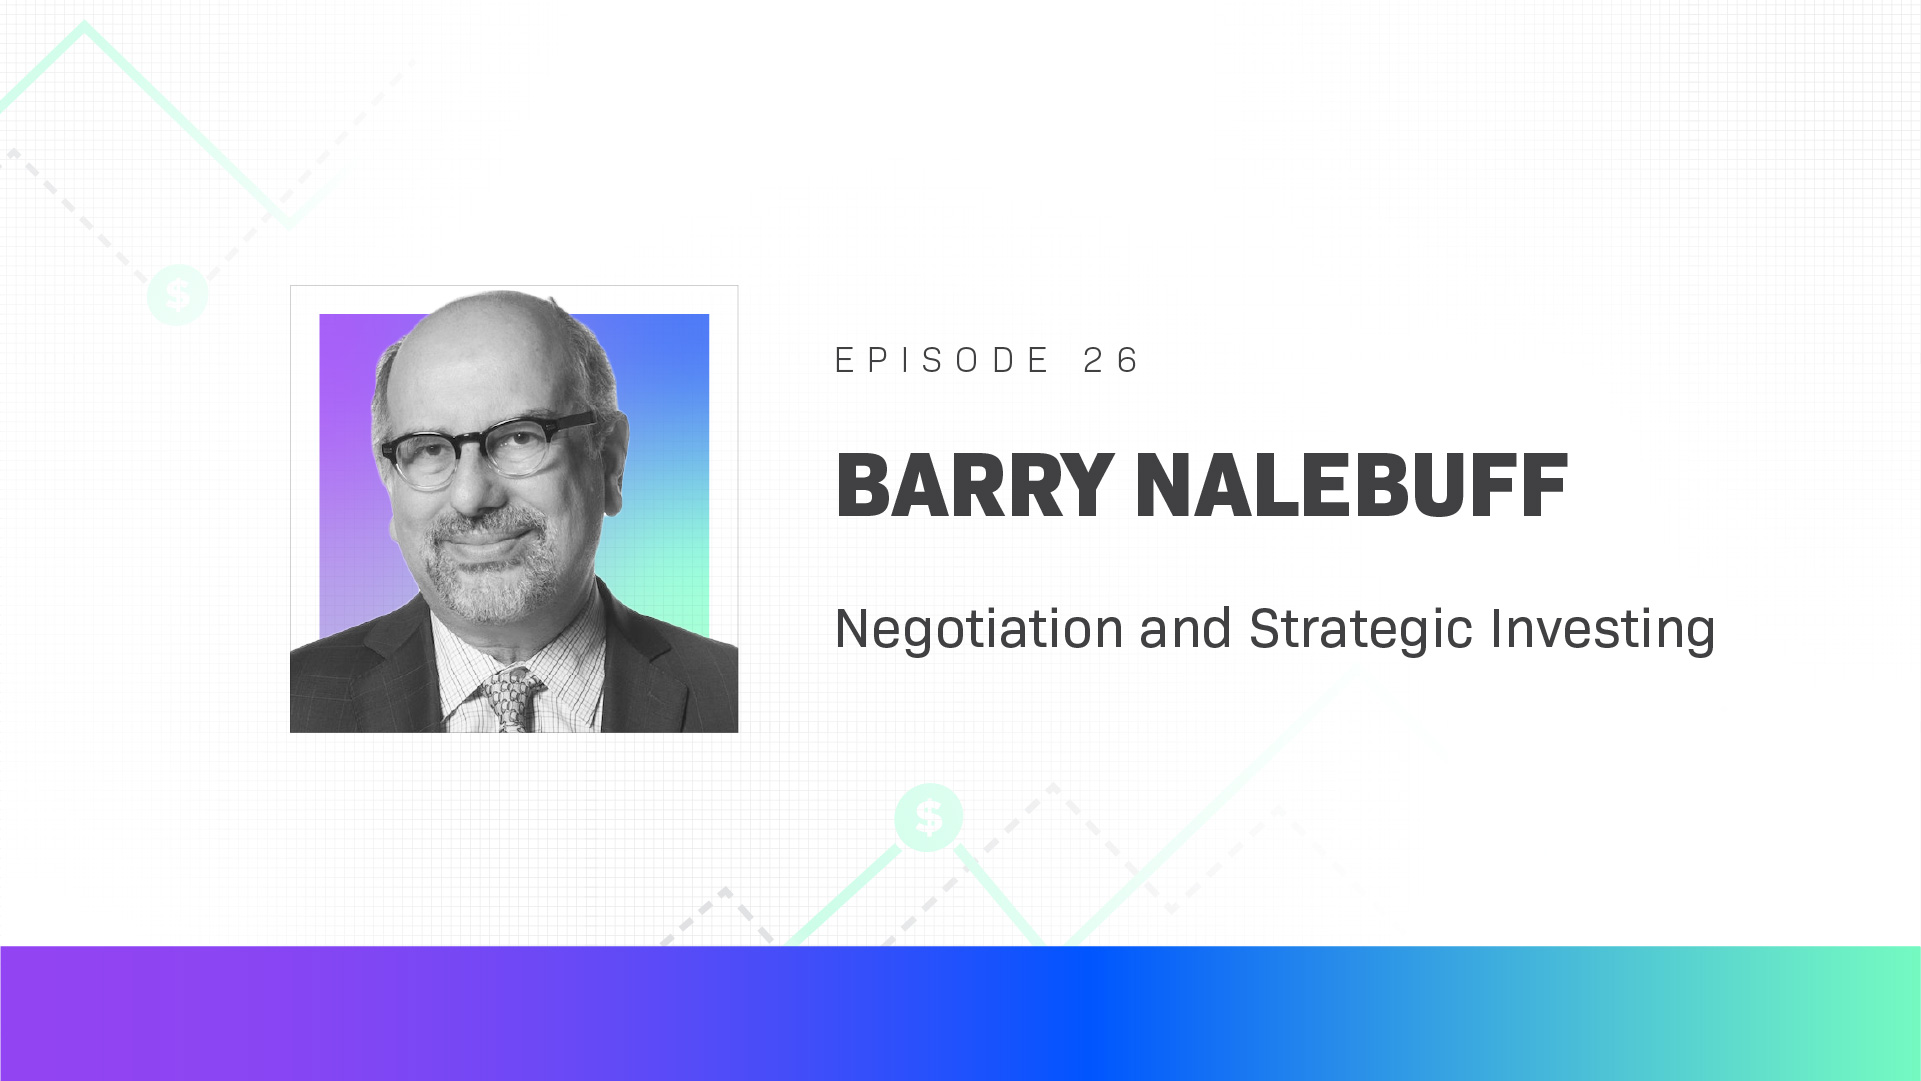 Barry Nalebuff on Negotiation and Strategic Investing